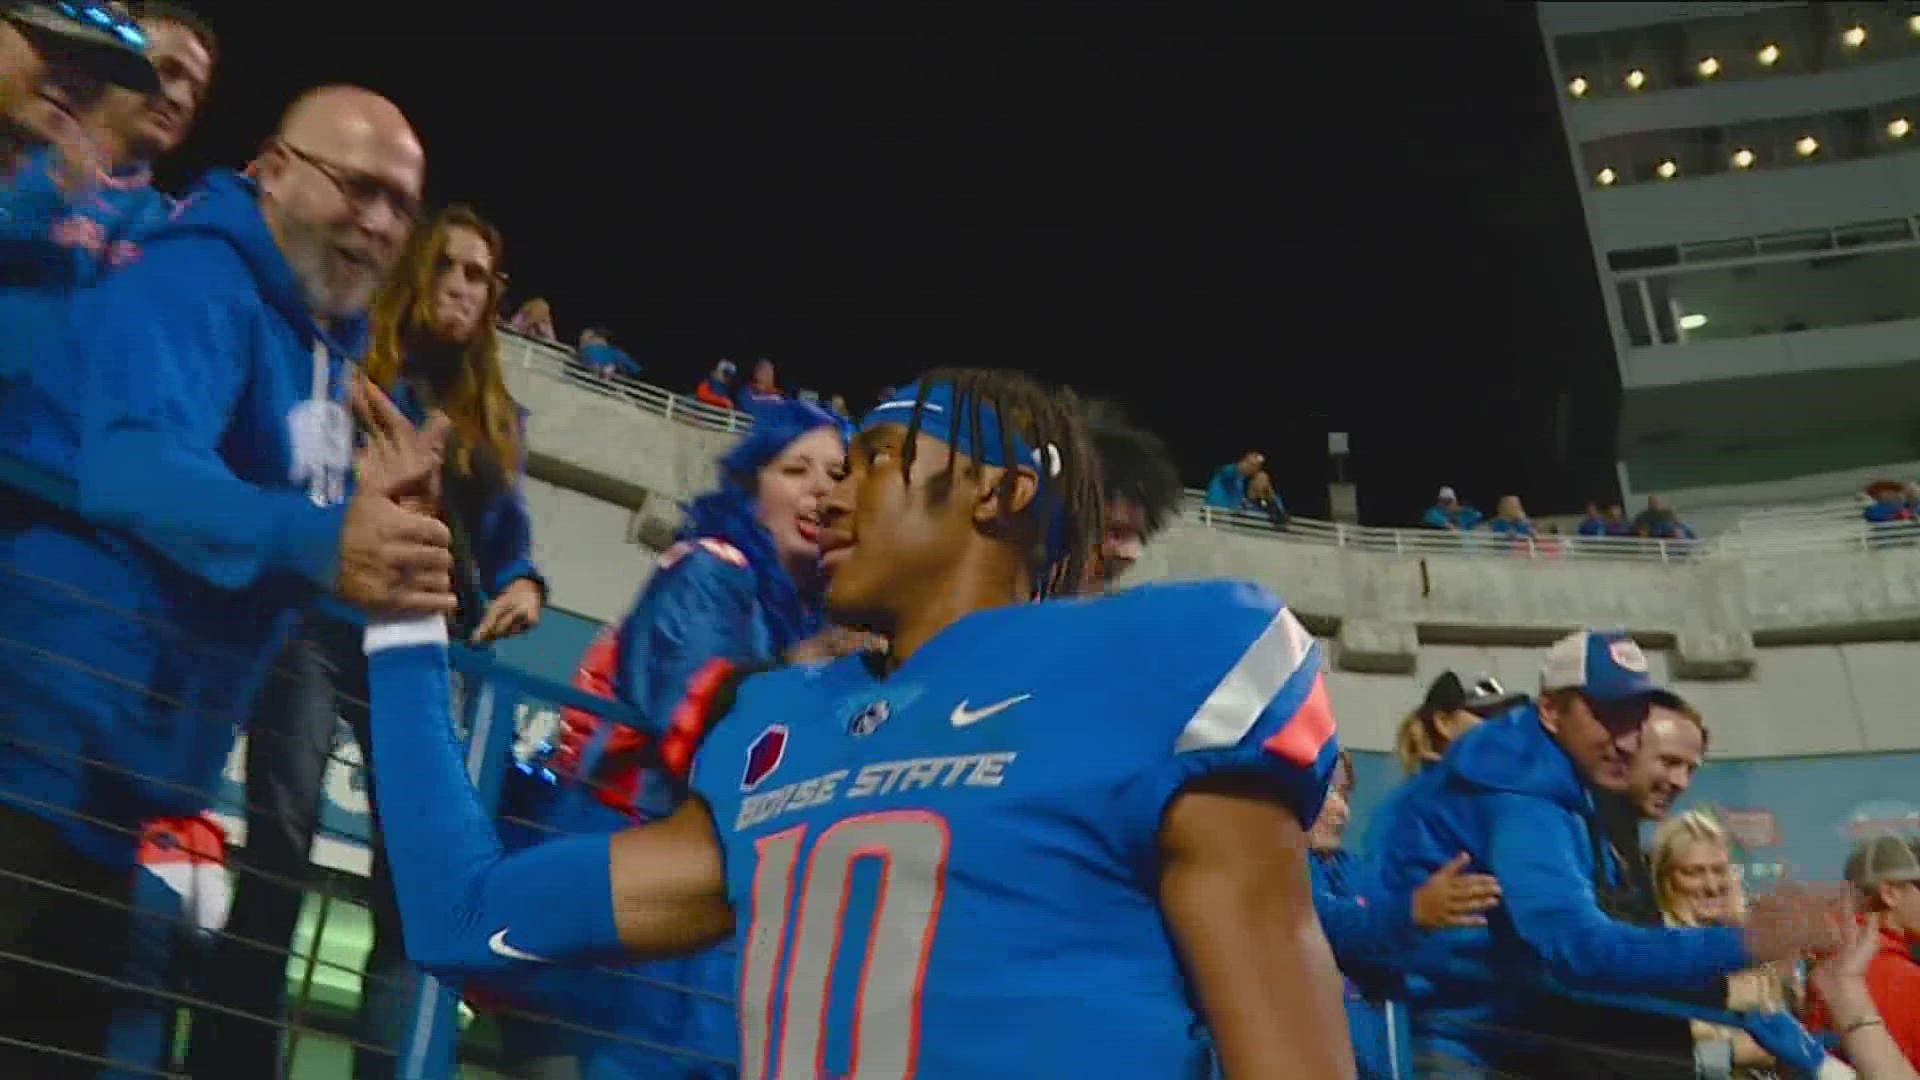 Following Boise State's 35-13 win, DJ Schramm was named Mountain West Defensive Player of the Week and Taylen Green earned Freshman of the Week honors.